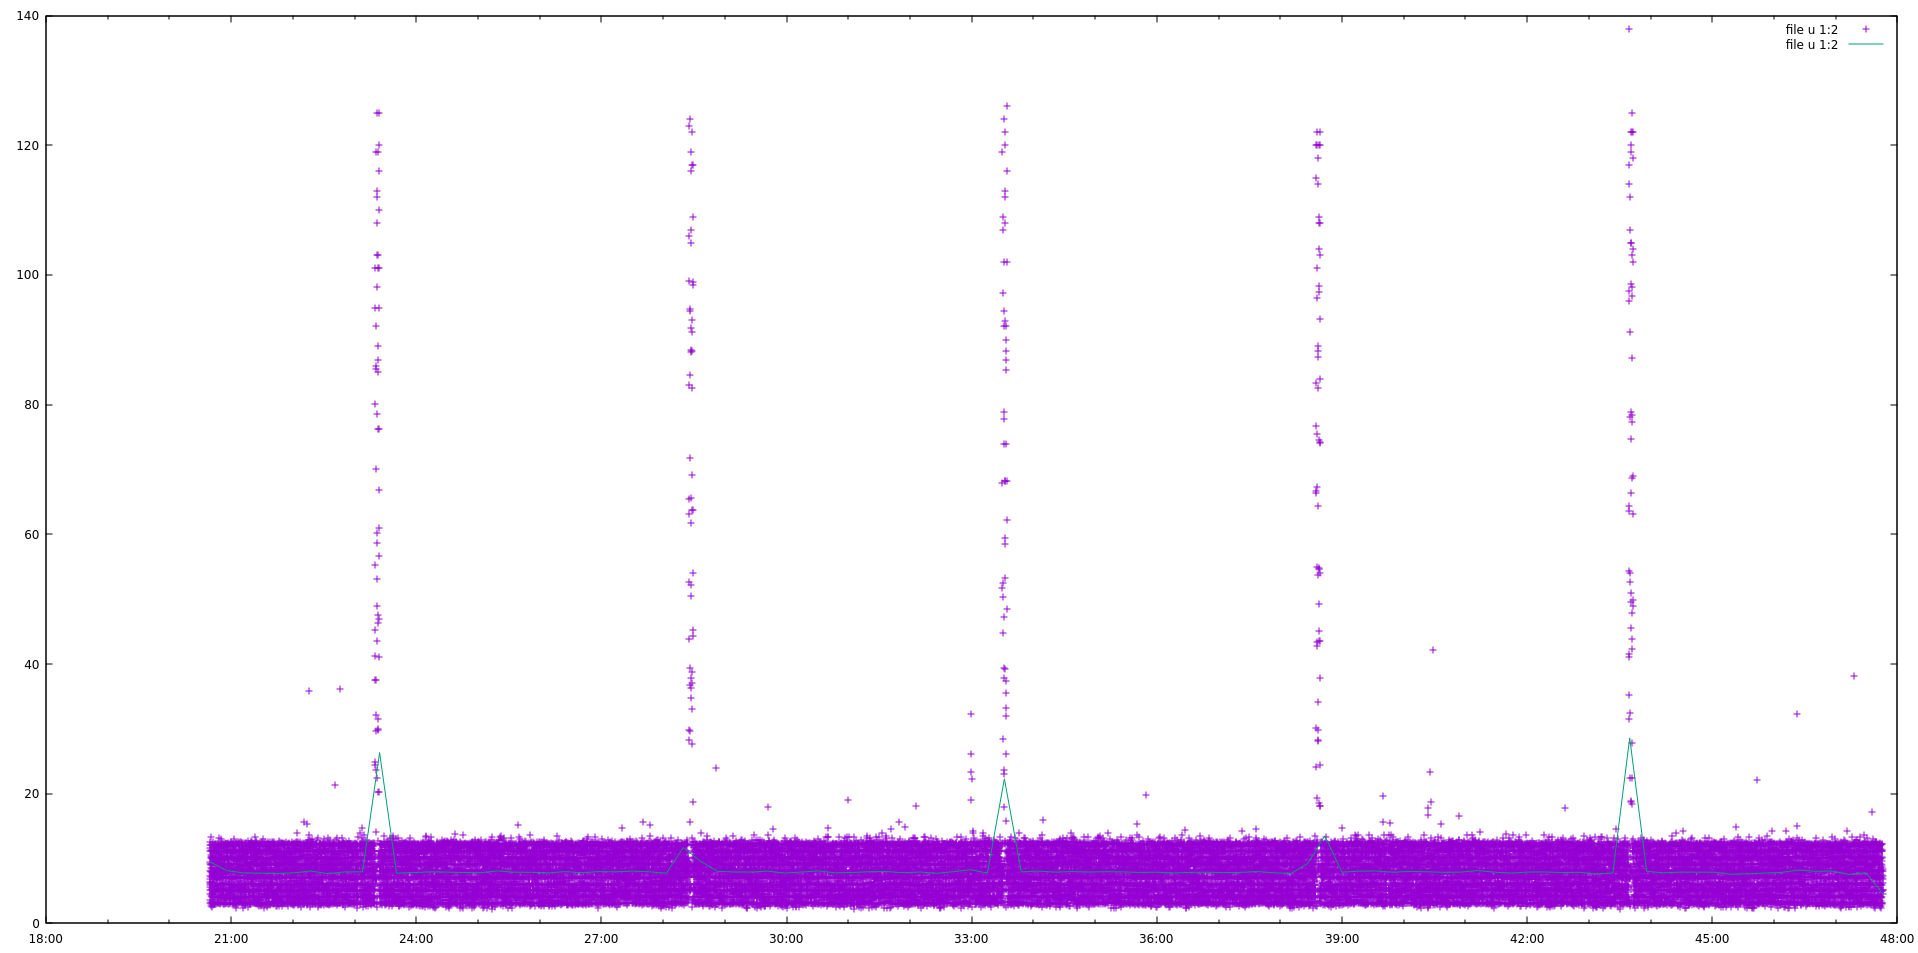 Graph of ping latency (ms) over time (mm:ss) showing spikes every 5min